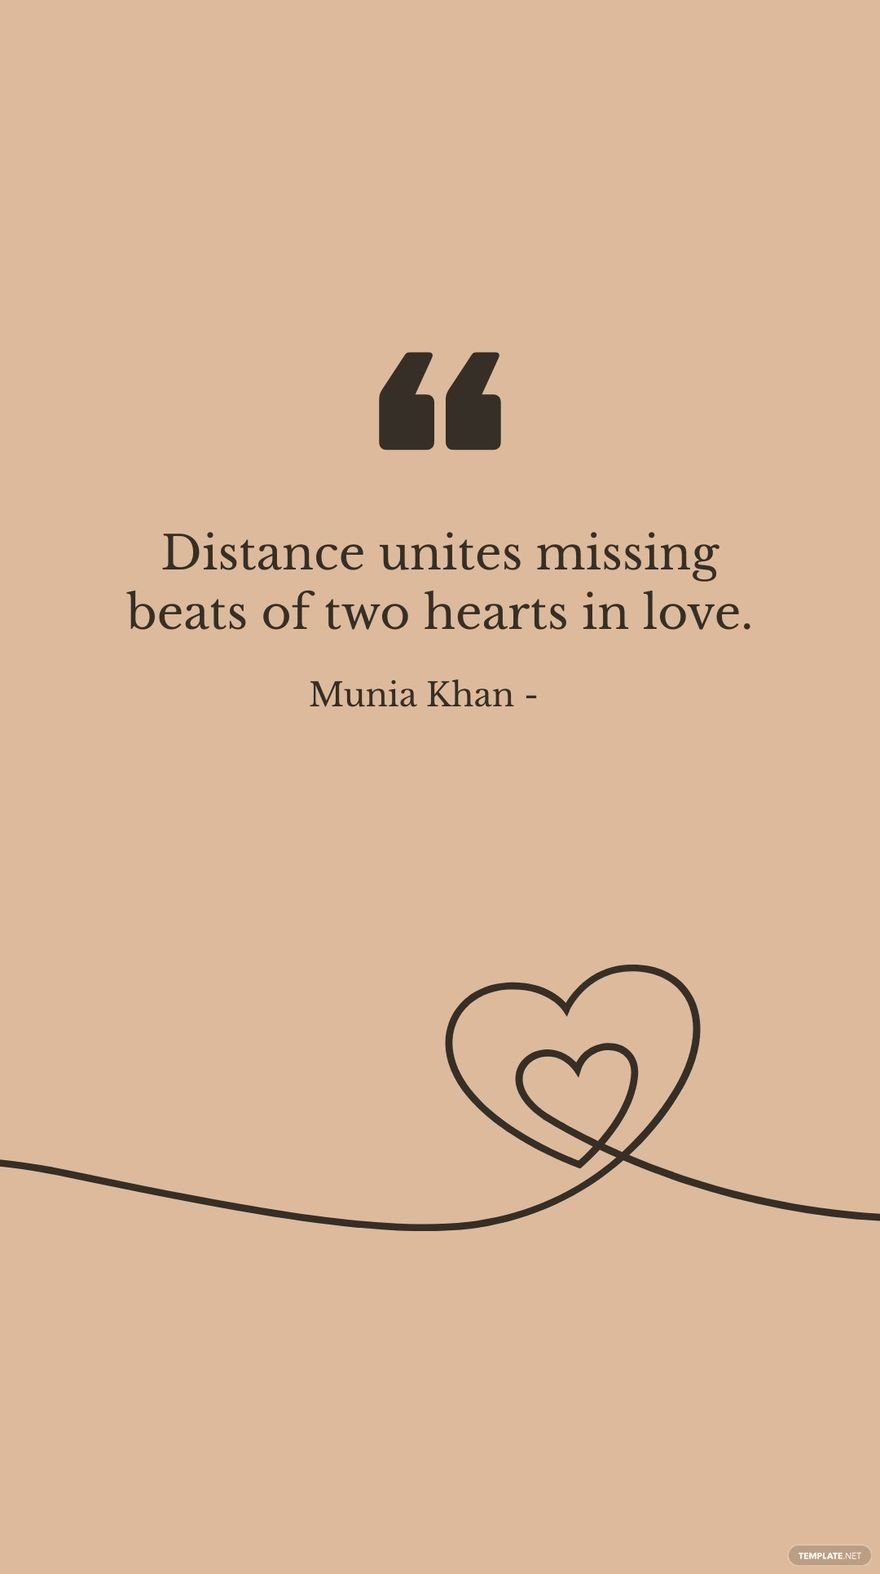 Munia Khan - Distance unites missing beats of two hearts in love. in JPG